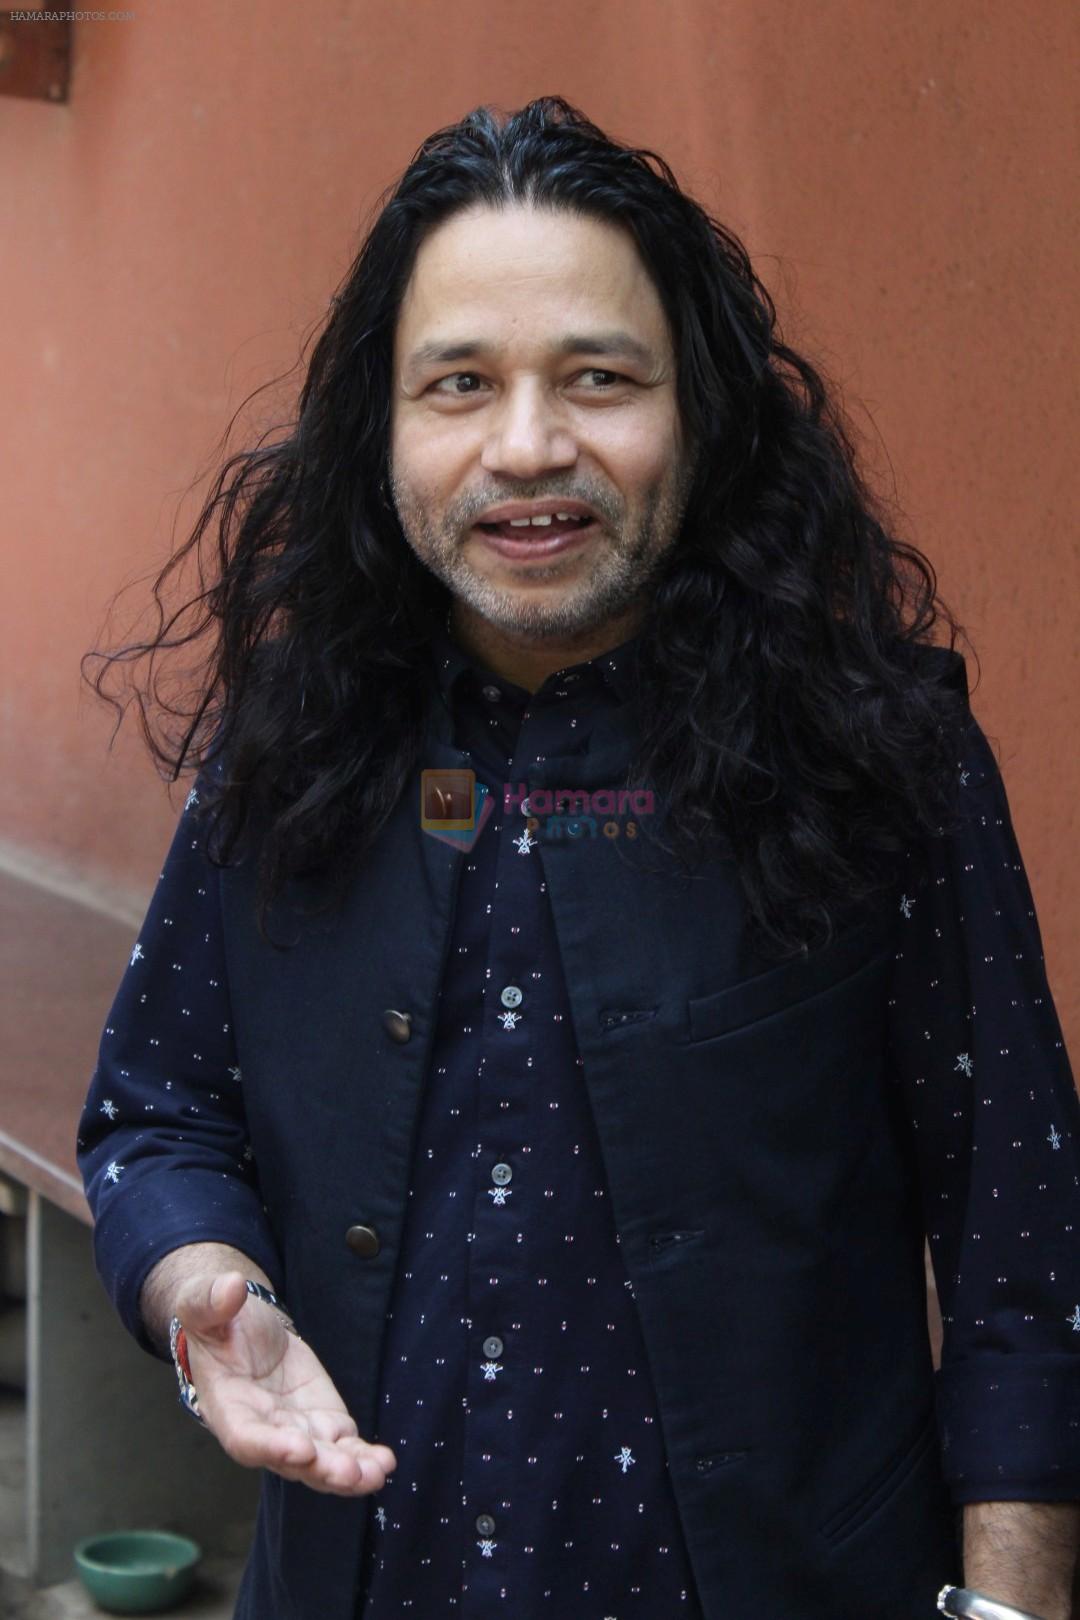 Kailash Kher at the Song Launch Of Vote Do For Movie Blue Mountains on 29th March 2017